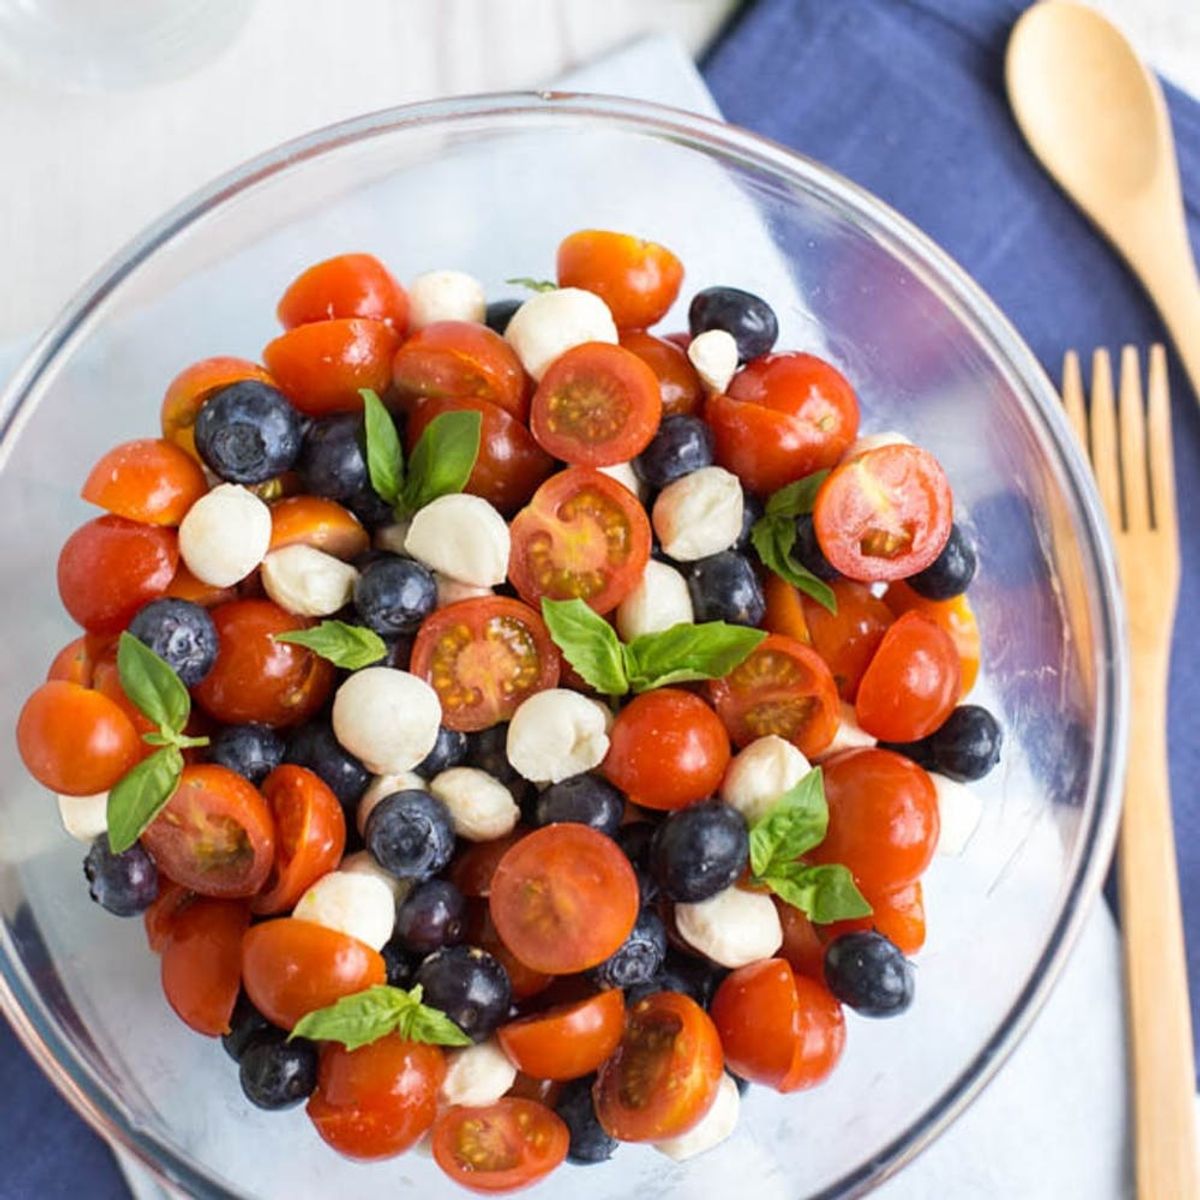 This 5 Ingredient Red, White and Blueberry Caprese Salad Will Be the Star of Your 4th of July Party!